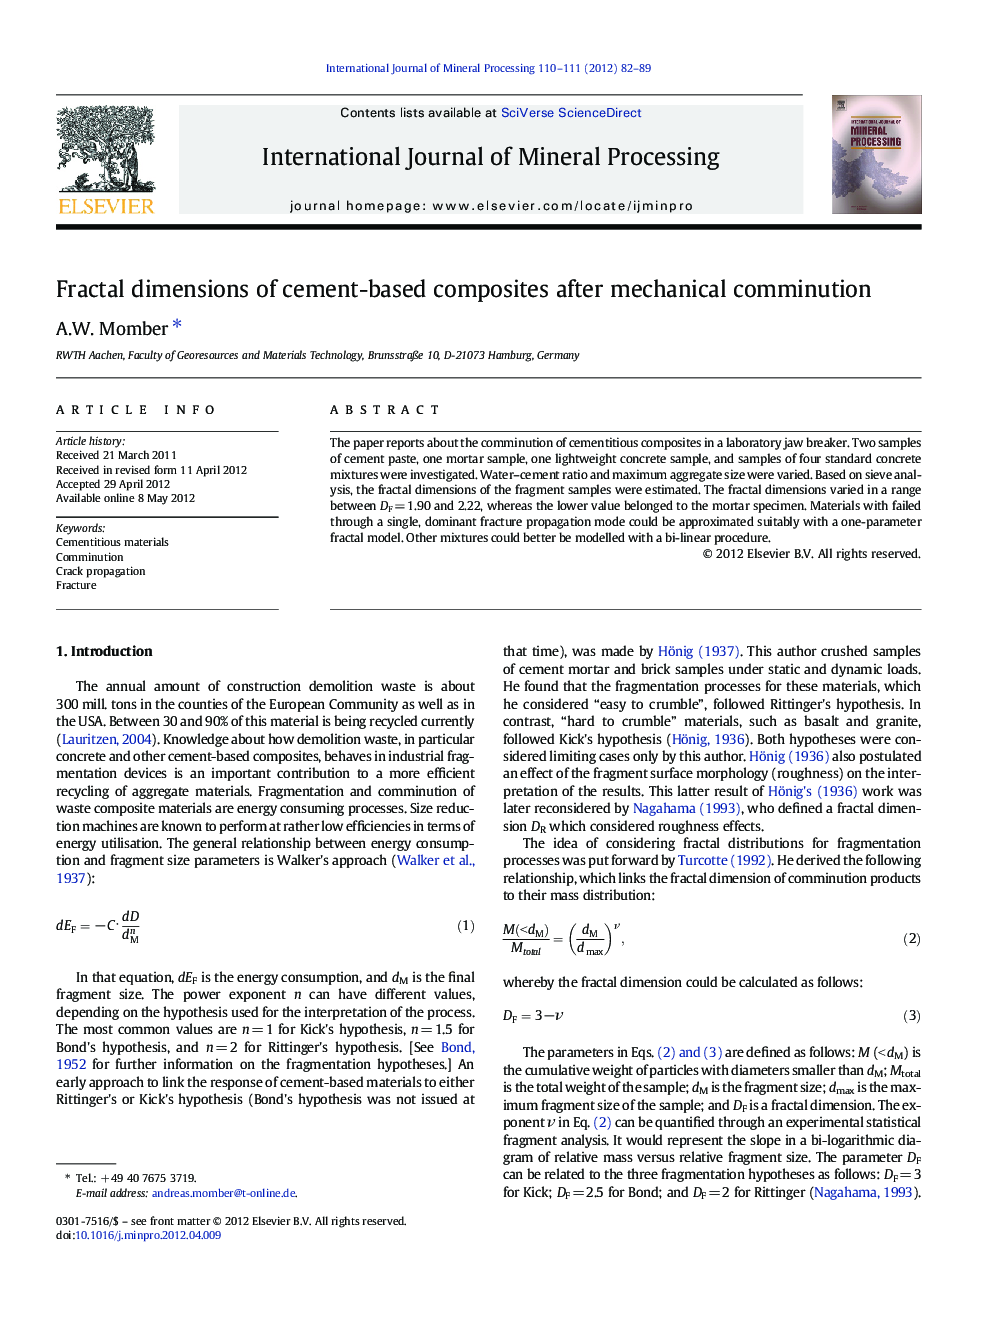 Fractal dimensions of cement-based composites after mechanical comminution